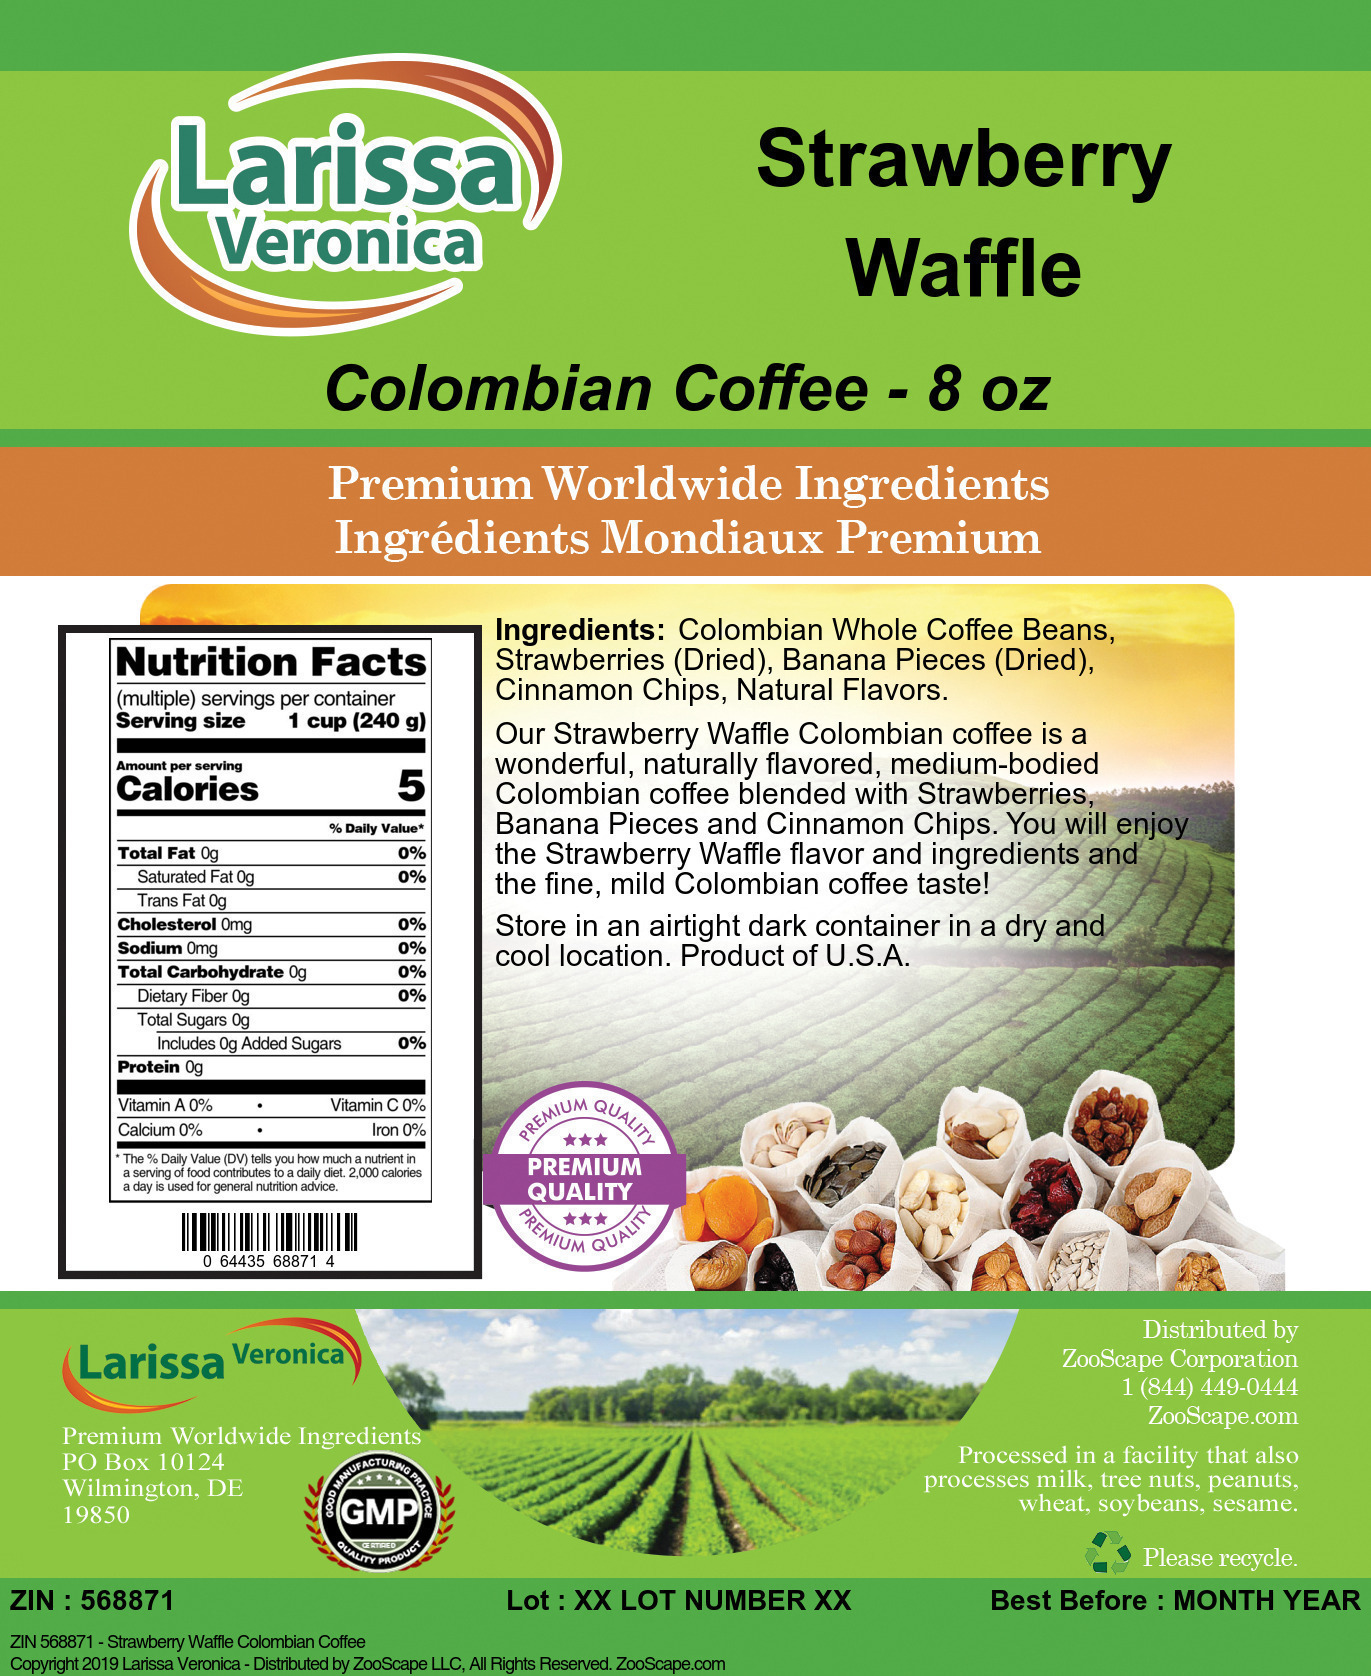 Strawberry Waffle Colombian Coffee - Label